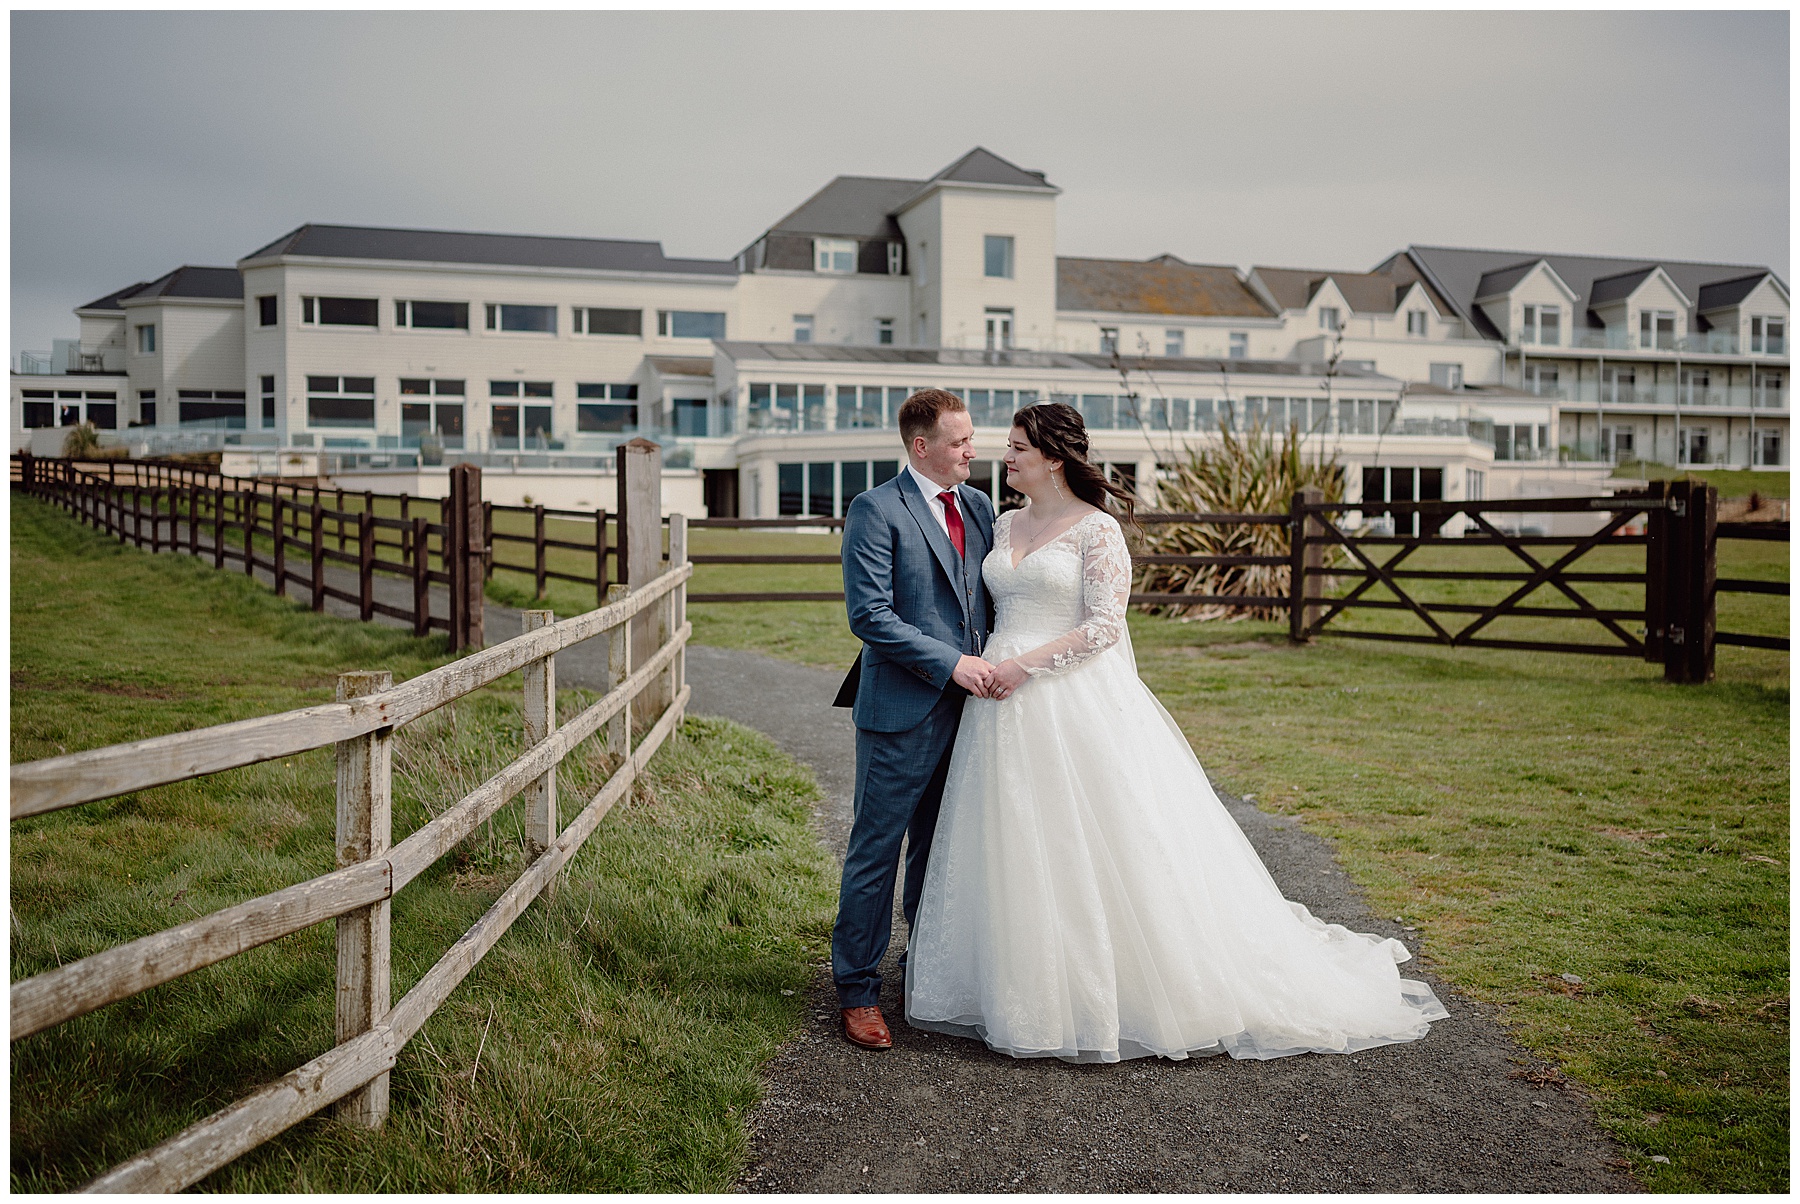 Wedding Photos at Cliff Hotel with Bride & Groom